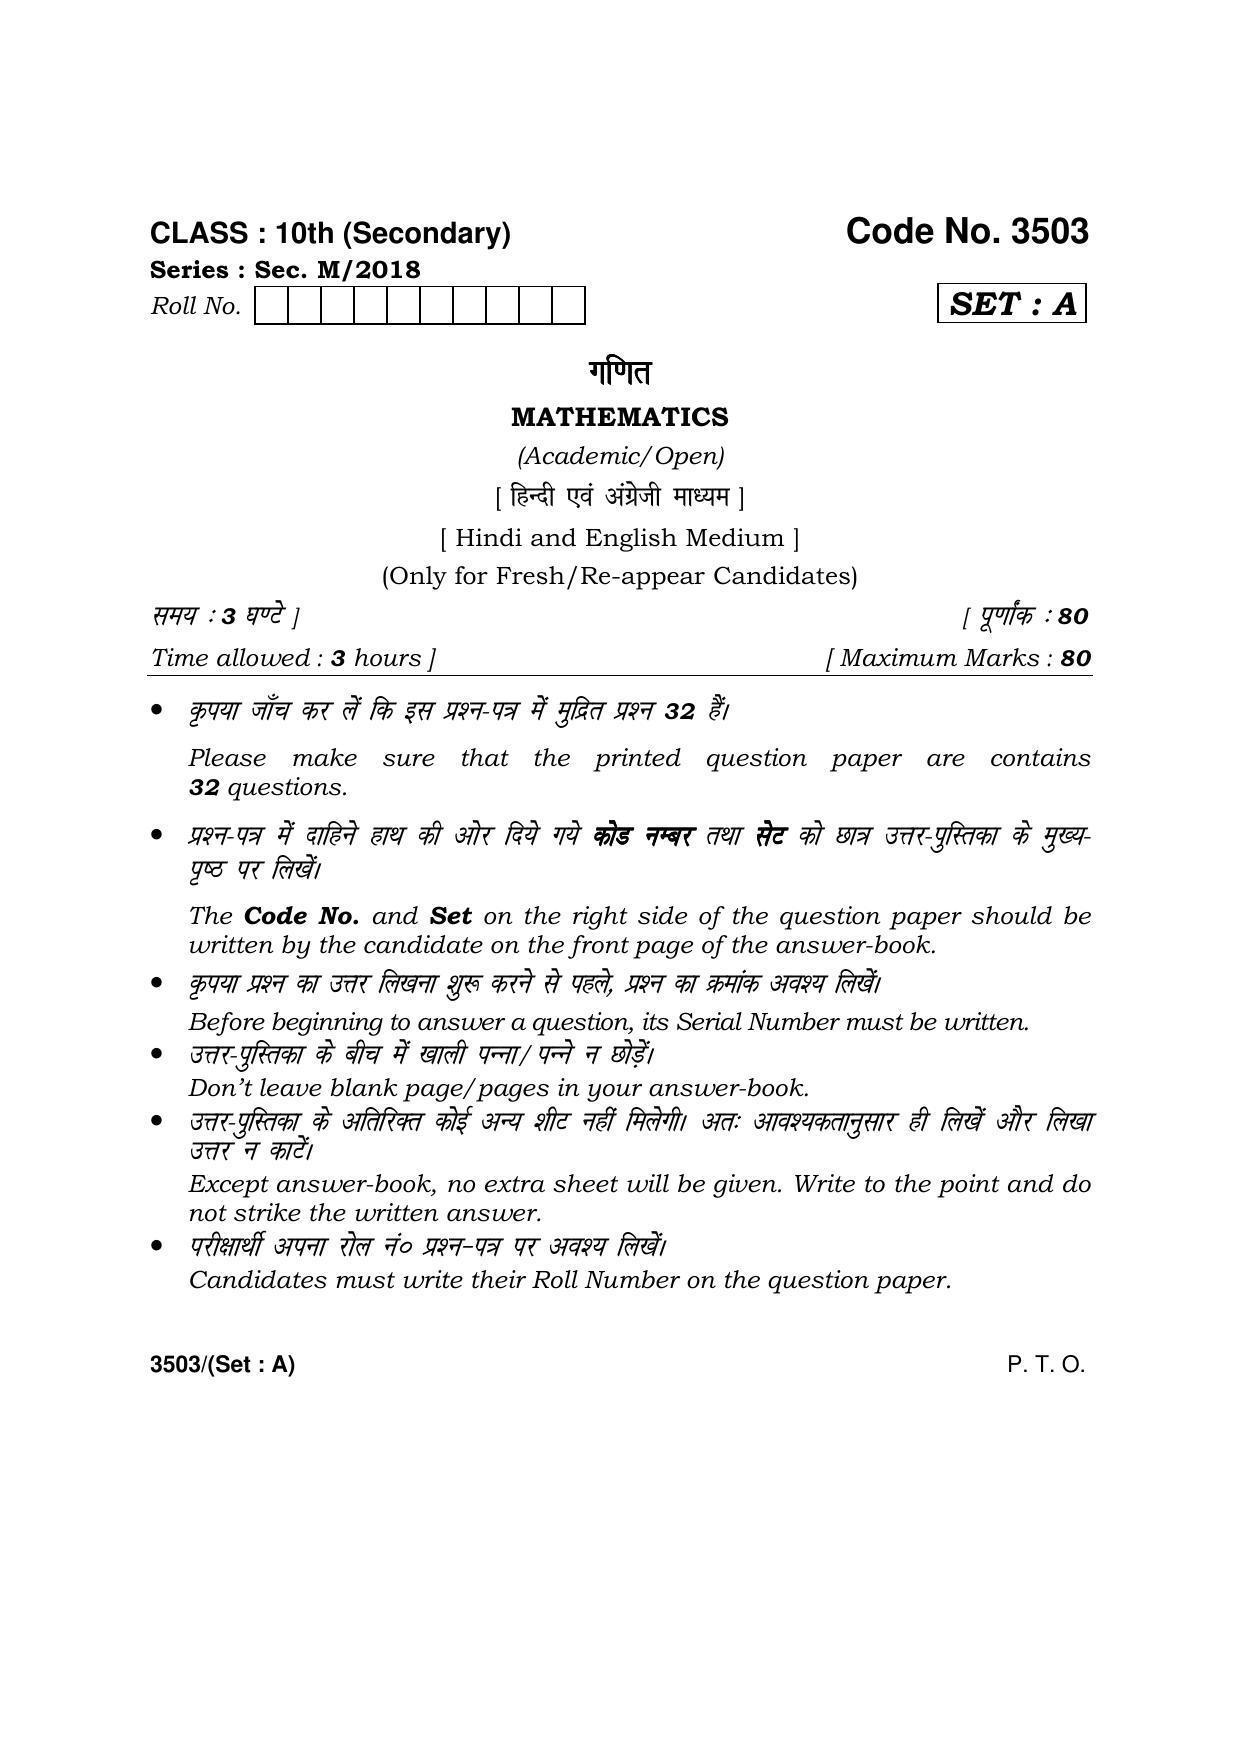 Haryana Board HBSE Class 10 Mathematics -A 2018 Question Paper - Page 1